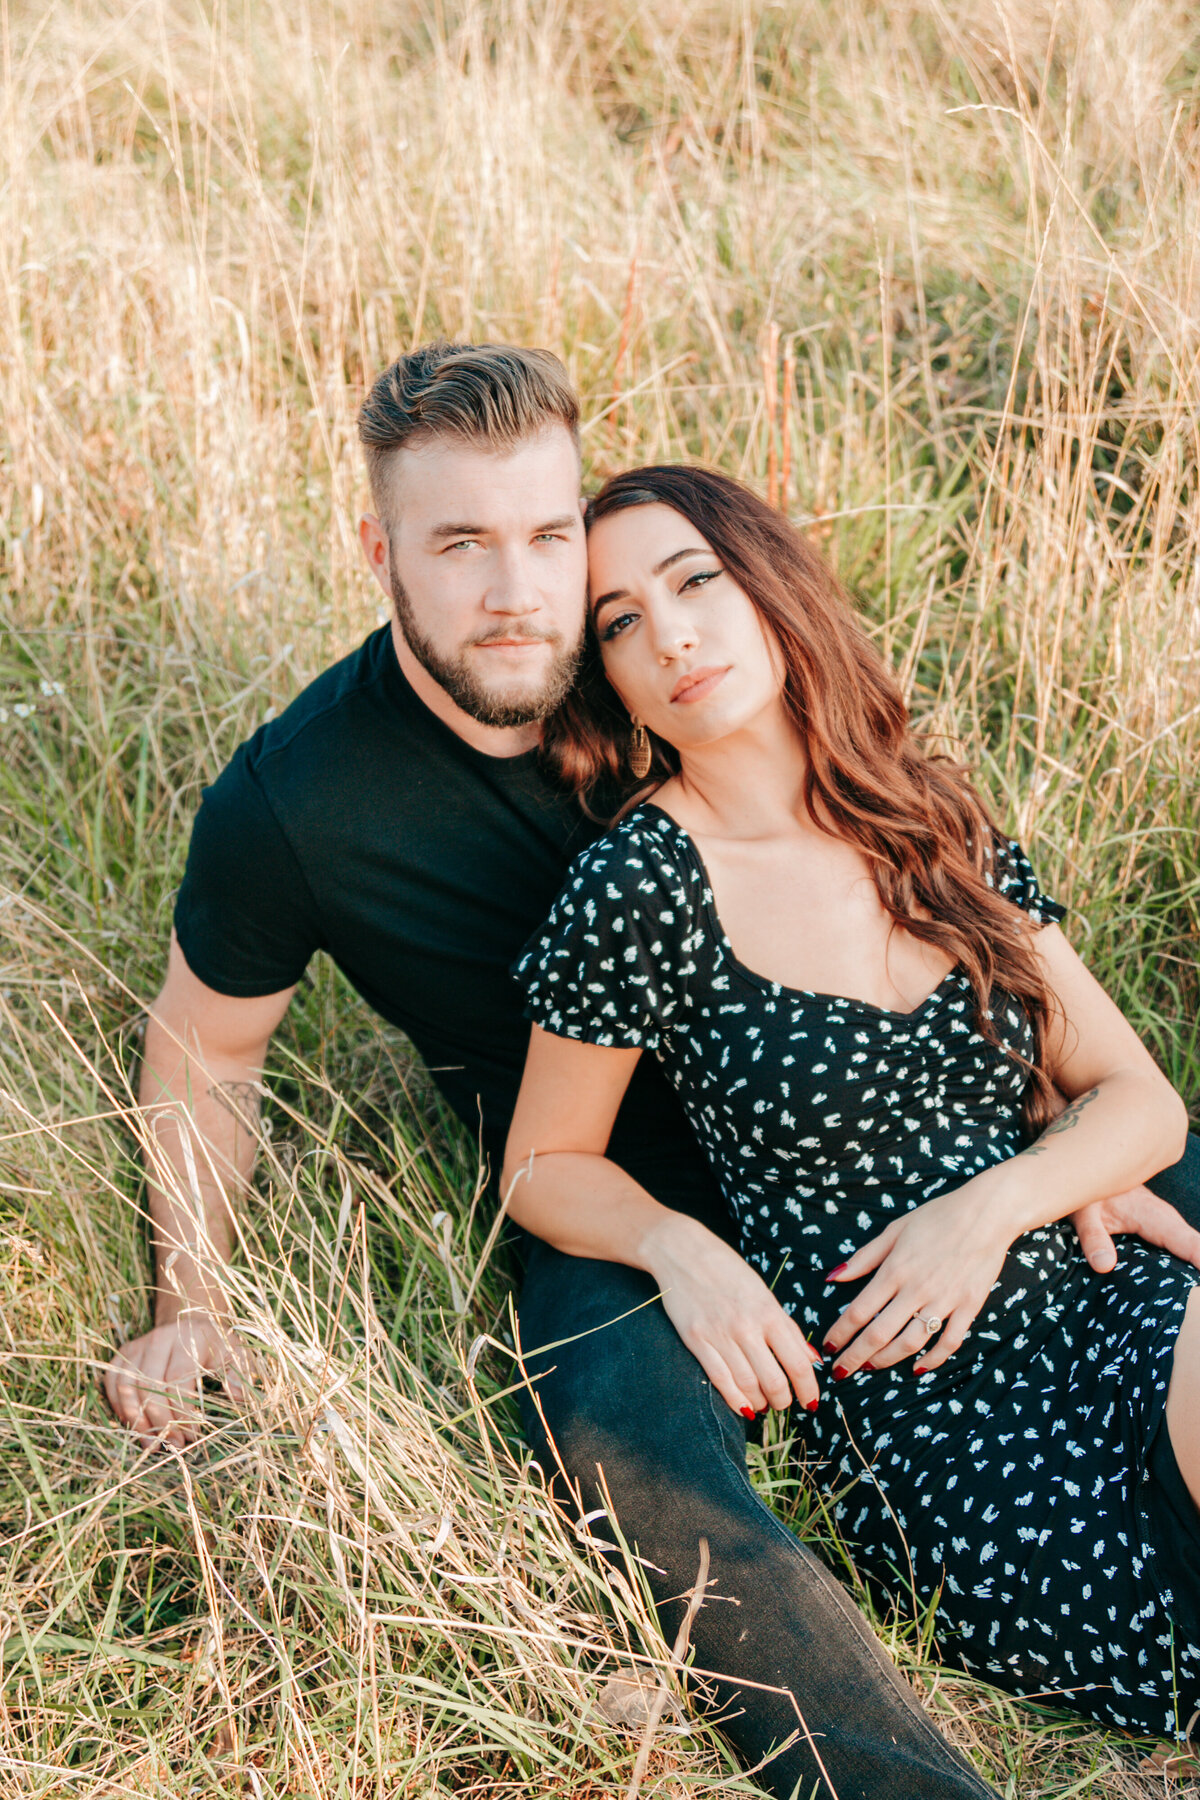 hot-couple-in-grass-field